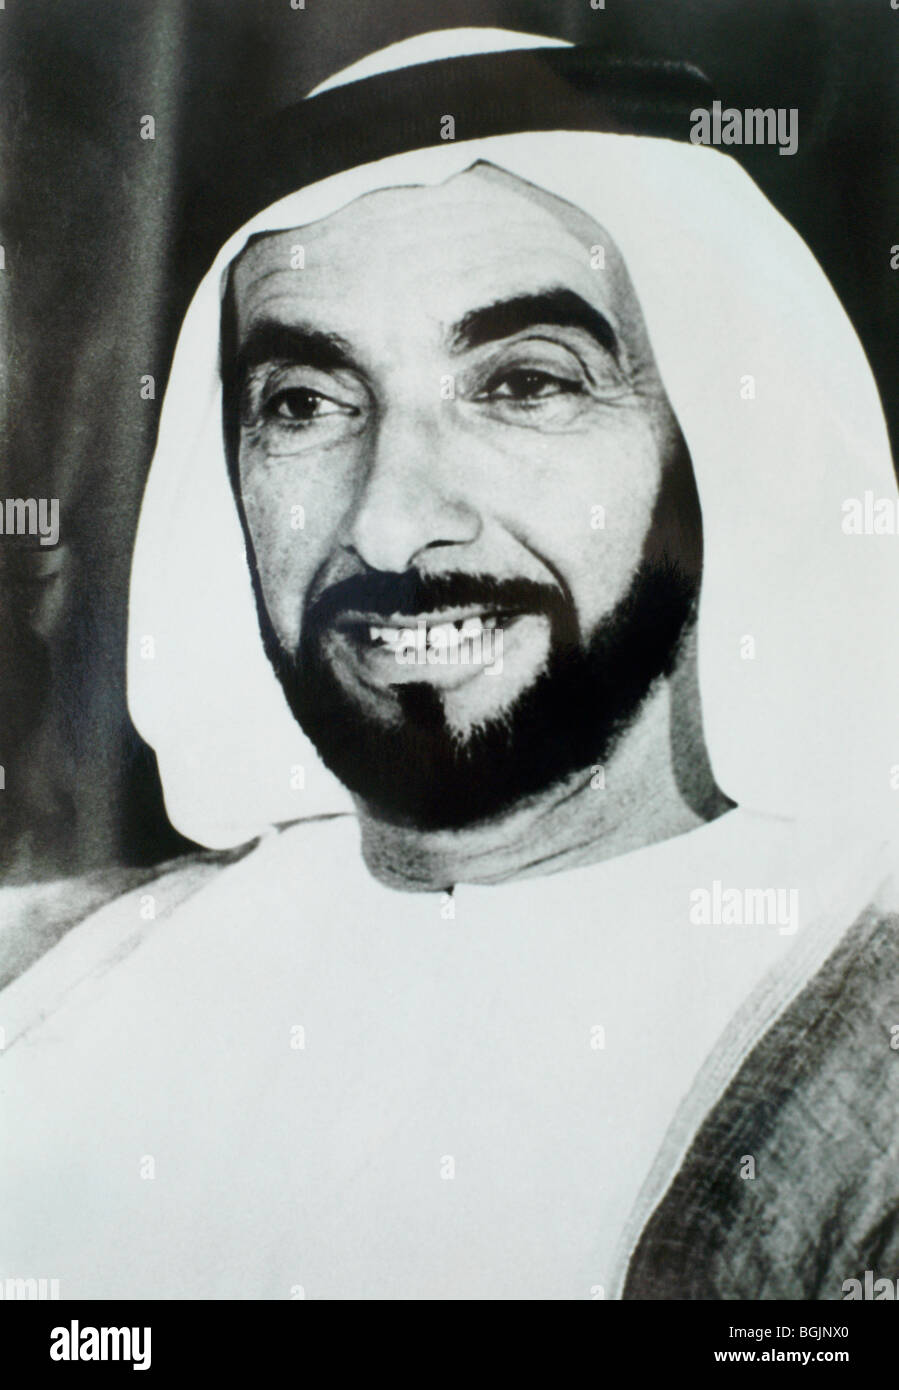 Sheikh Zayed Bin Sultan Al-Nahyan Ruler of Abu Dhabi 1966 - 2004 and Founding Father behind the  Formation of the UAE and the First Unions President Stock Photo